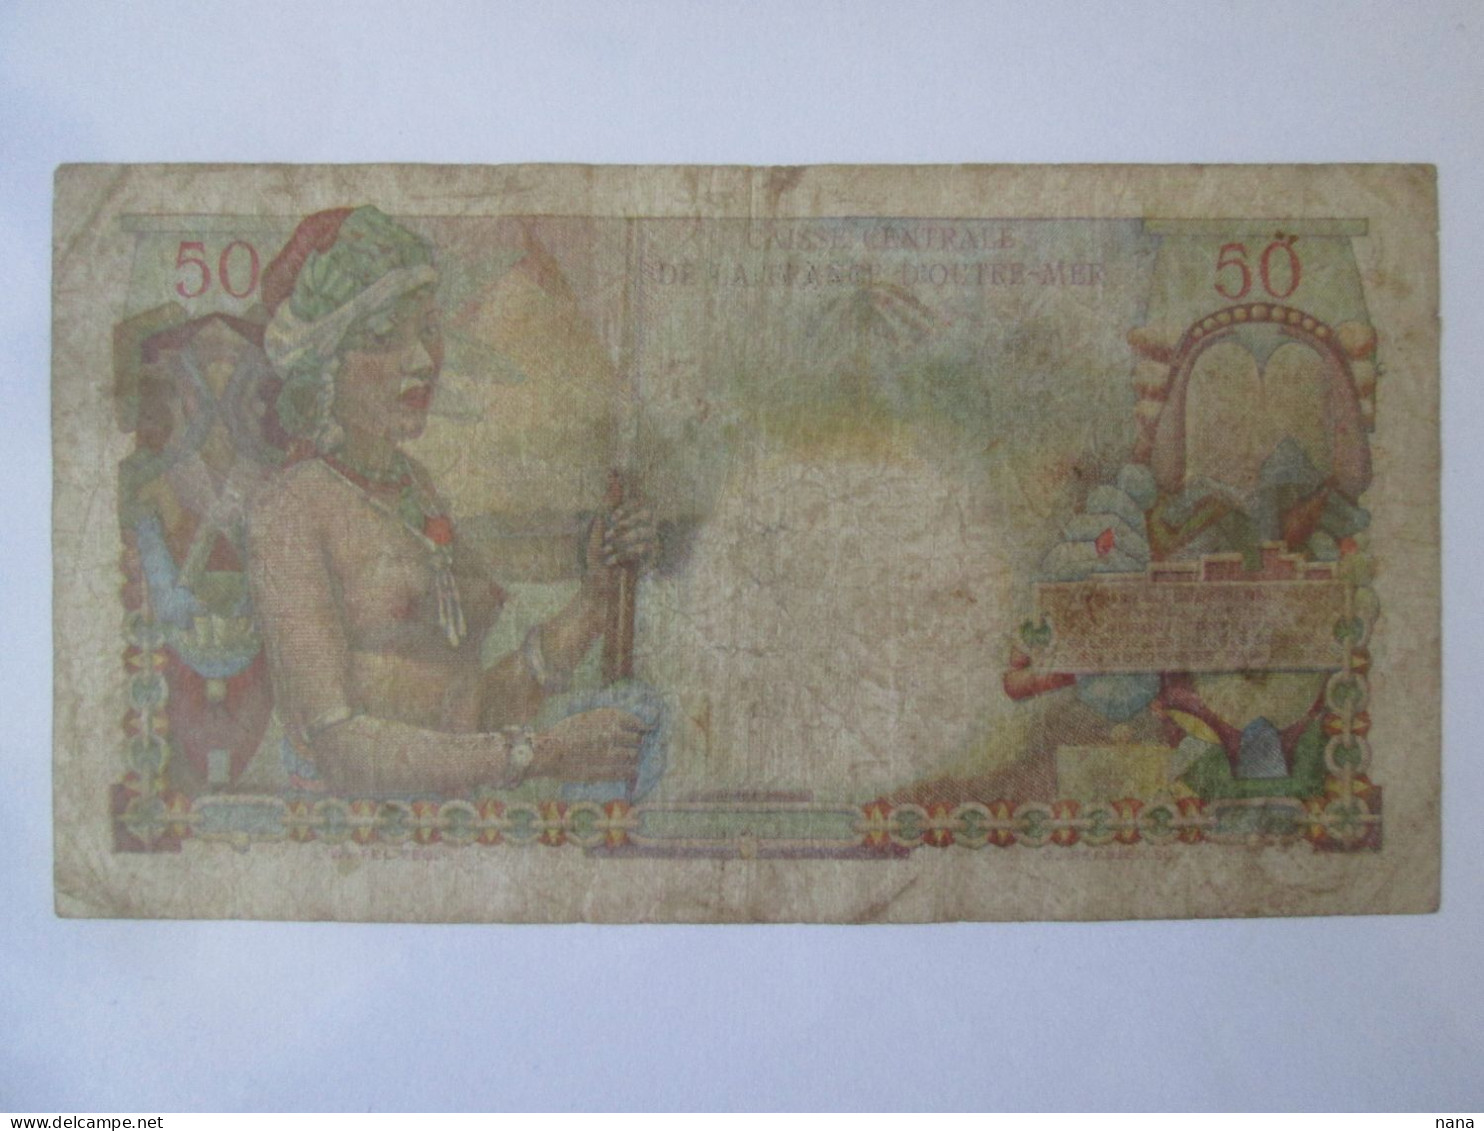 Rare! France DOM-TOM(Guadeloupe+Martinique) 50 Francs 1947-1949 CCFOM Banknote See Pictures - Unclassified